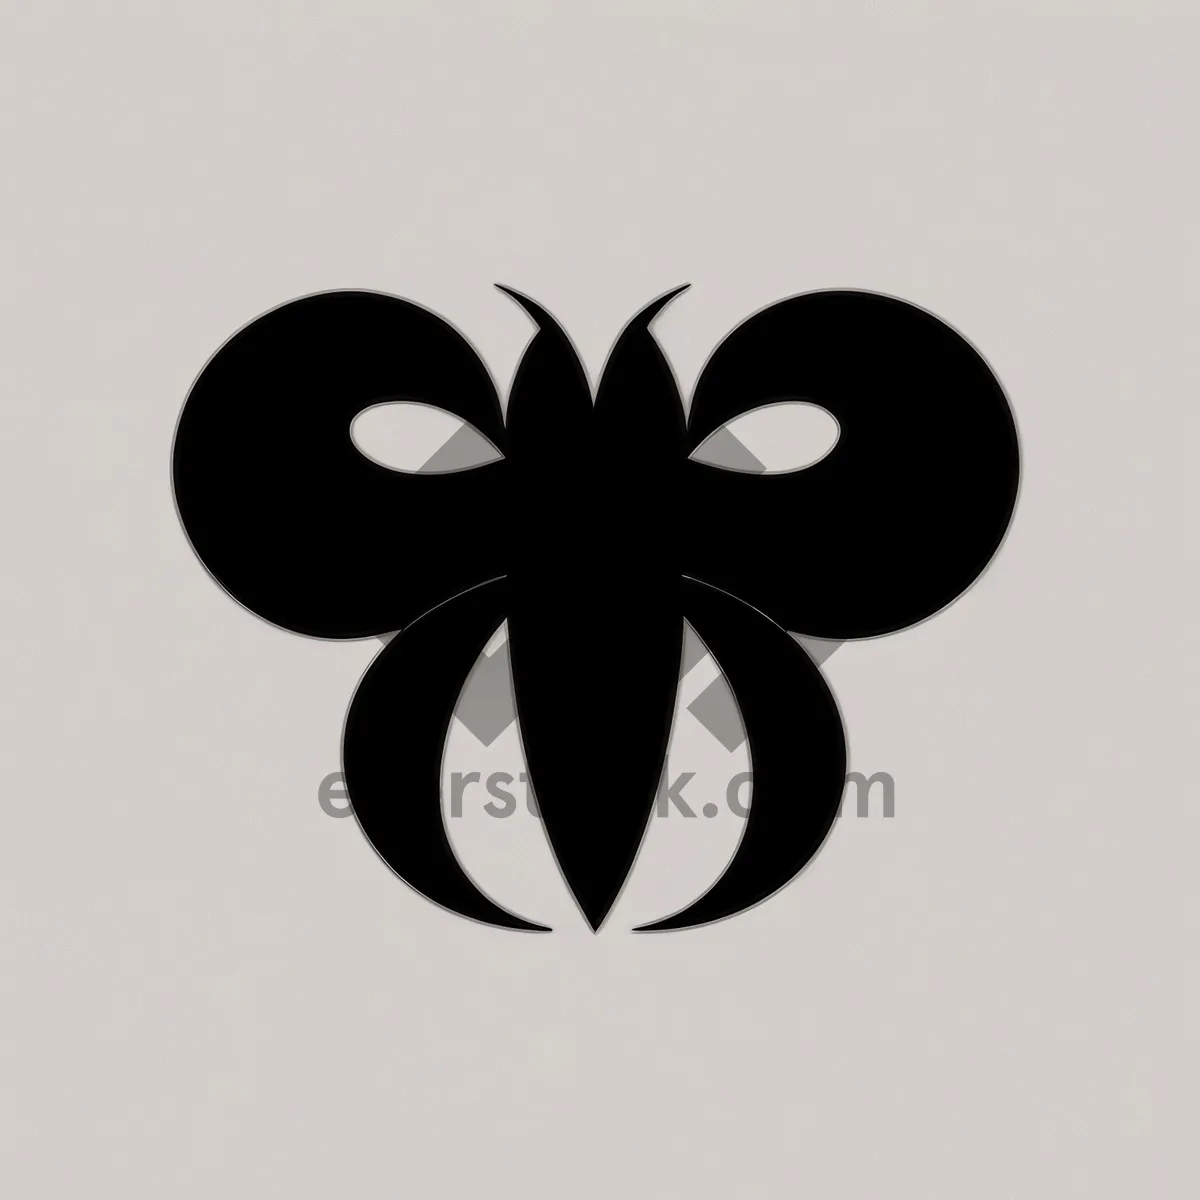 Picture of Floral Clover Design - Artistic Black Silhouette